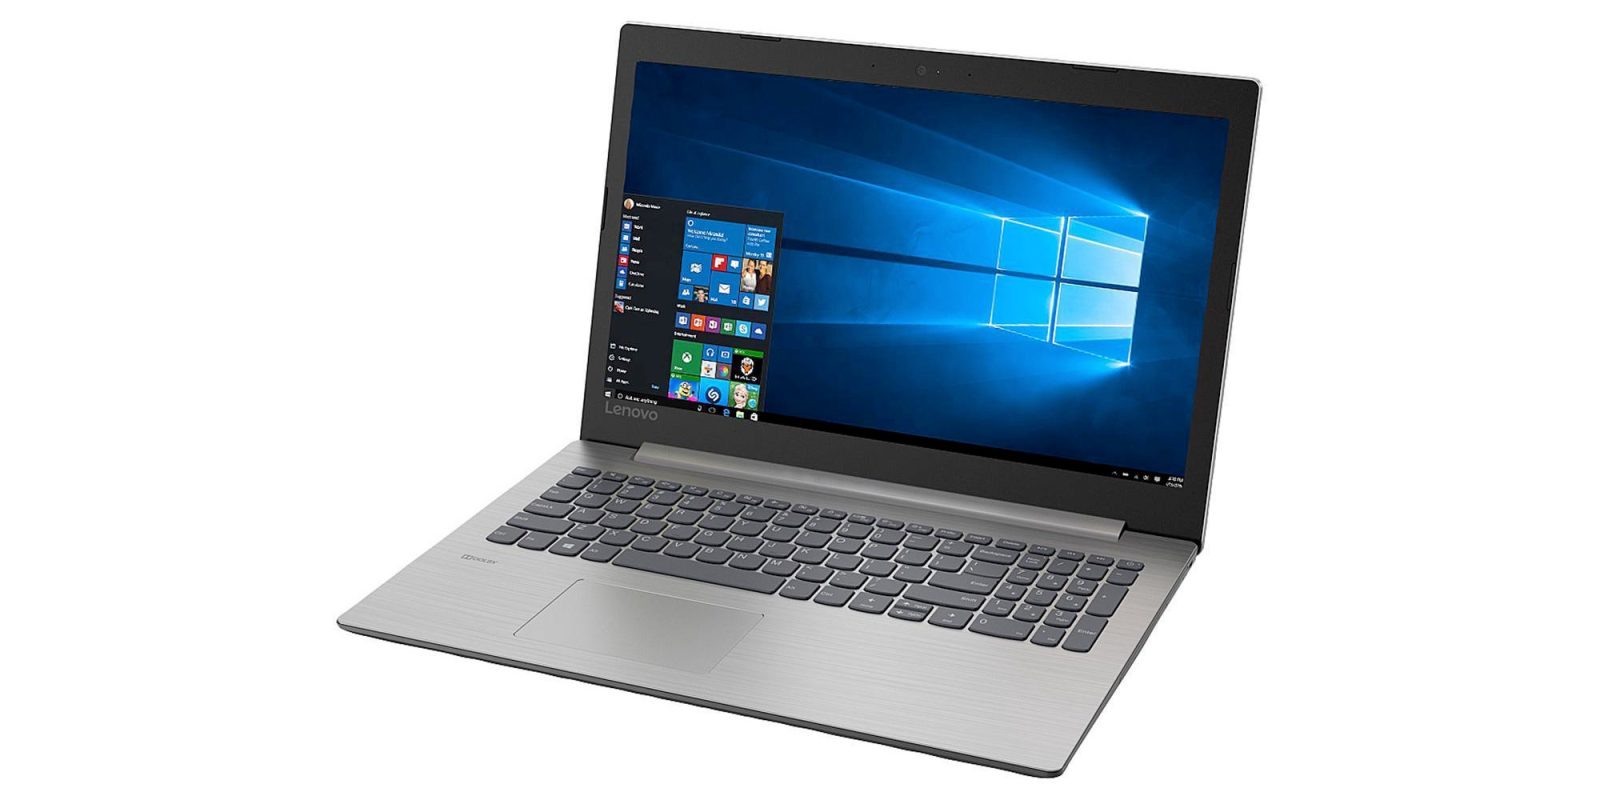 Lenovo's IdeaPad 330 is great for college classes or couch surfing: $500 (Reg. $650+) - 9to5Toys